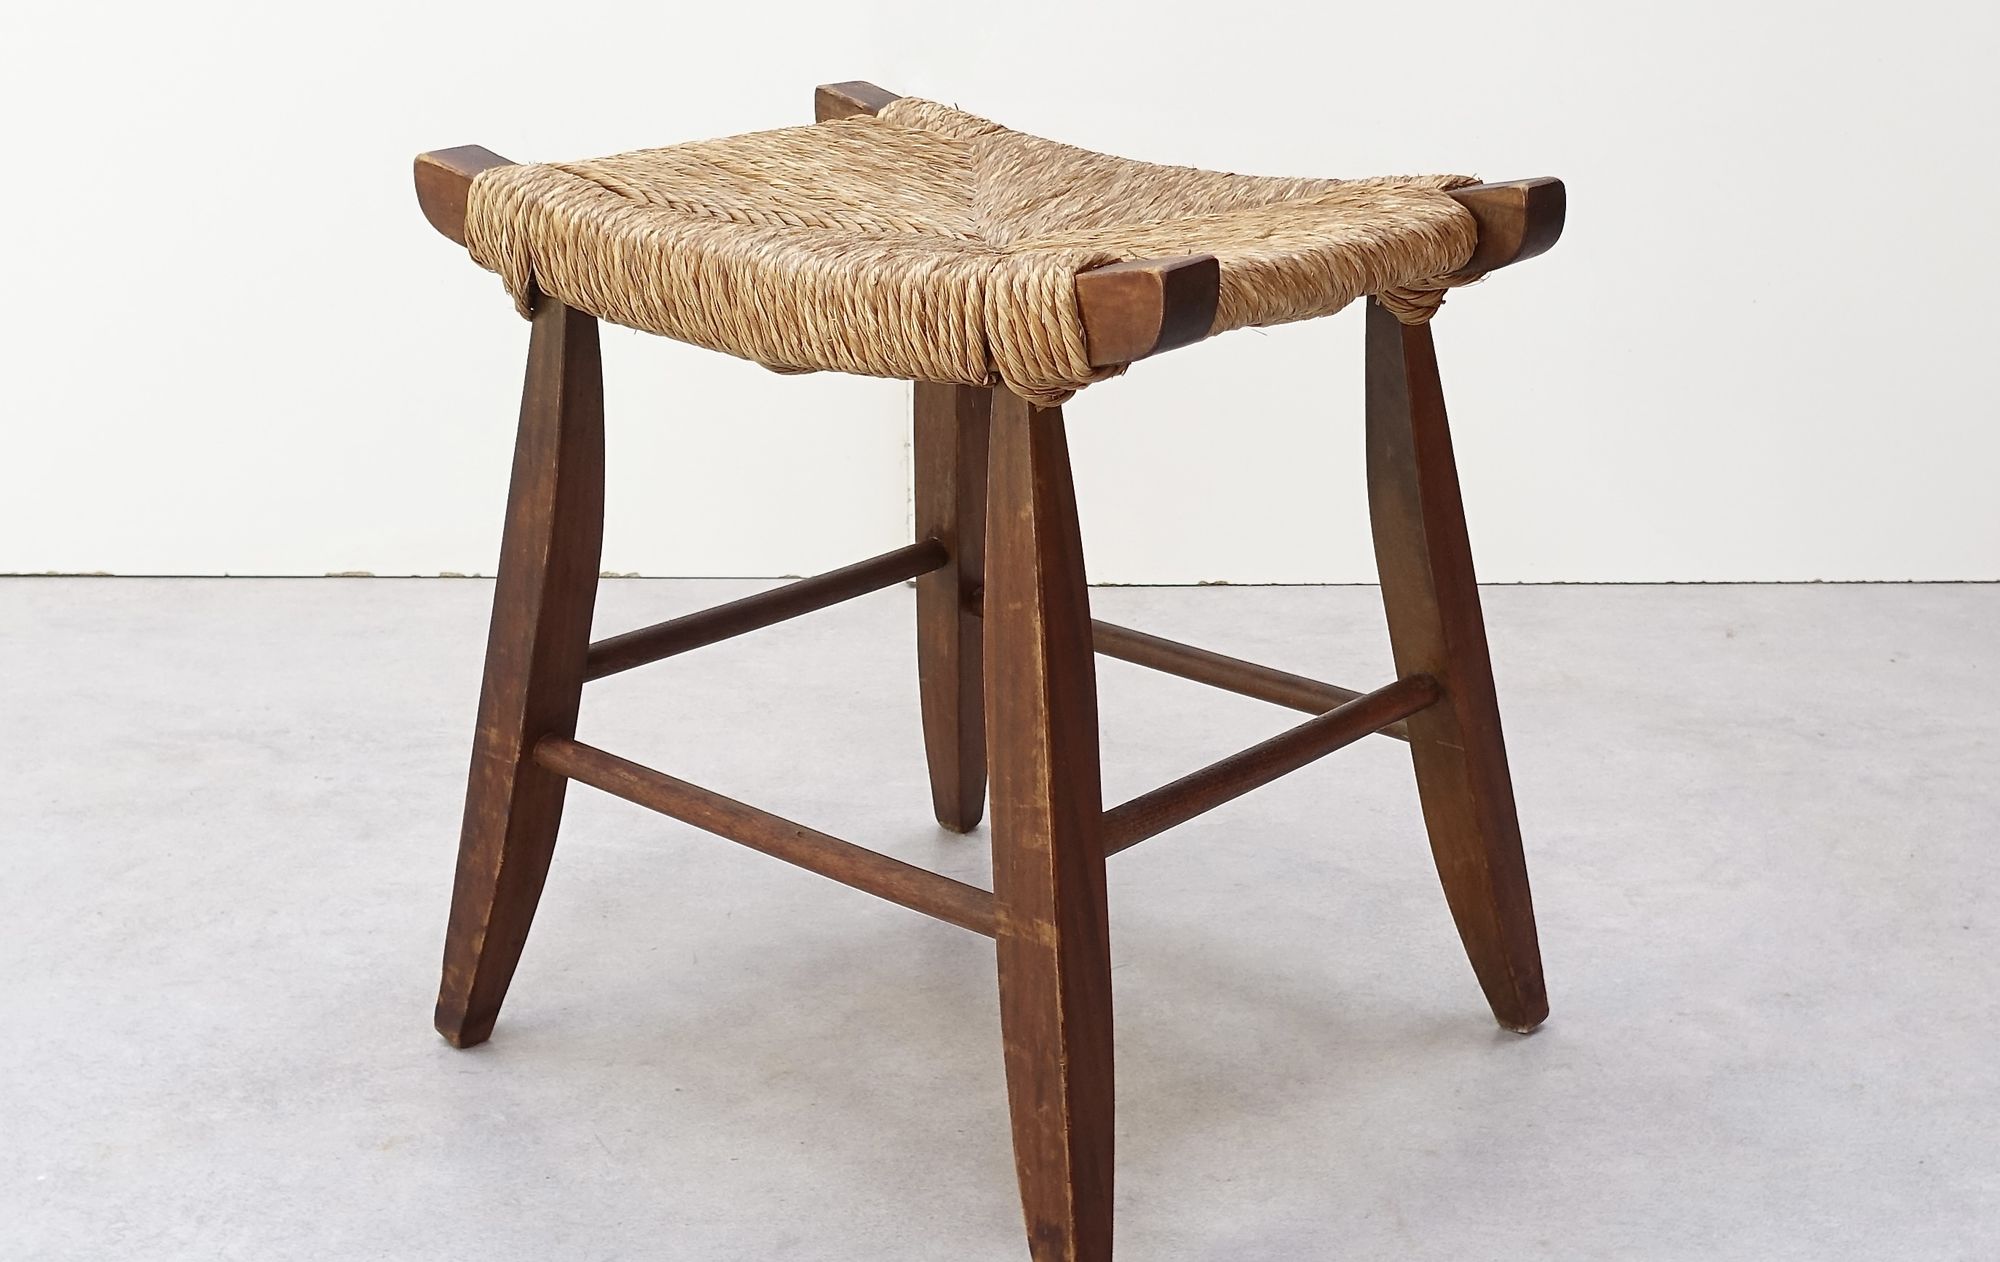 Stool in solid wood and straw, Swiss provenance